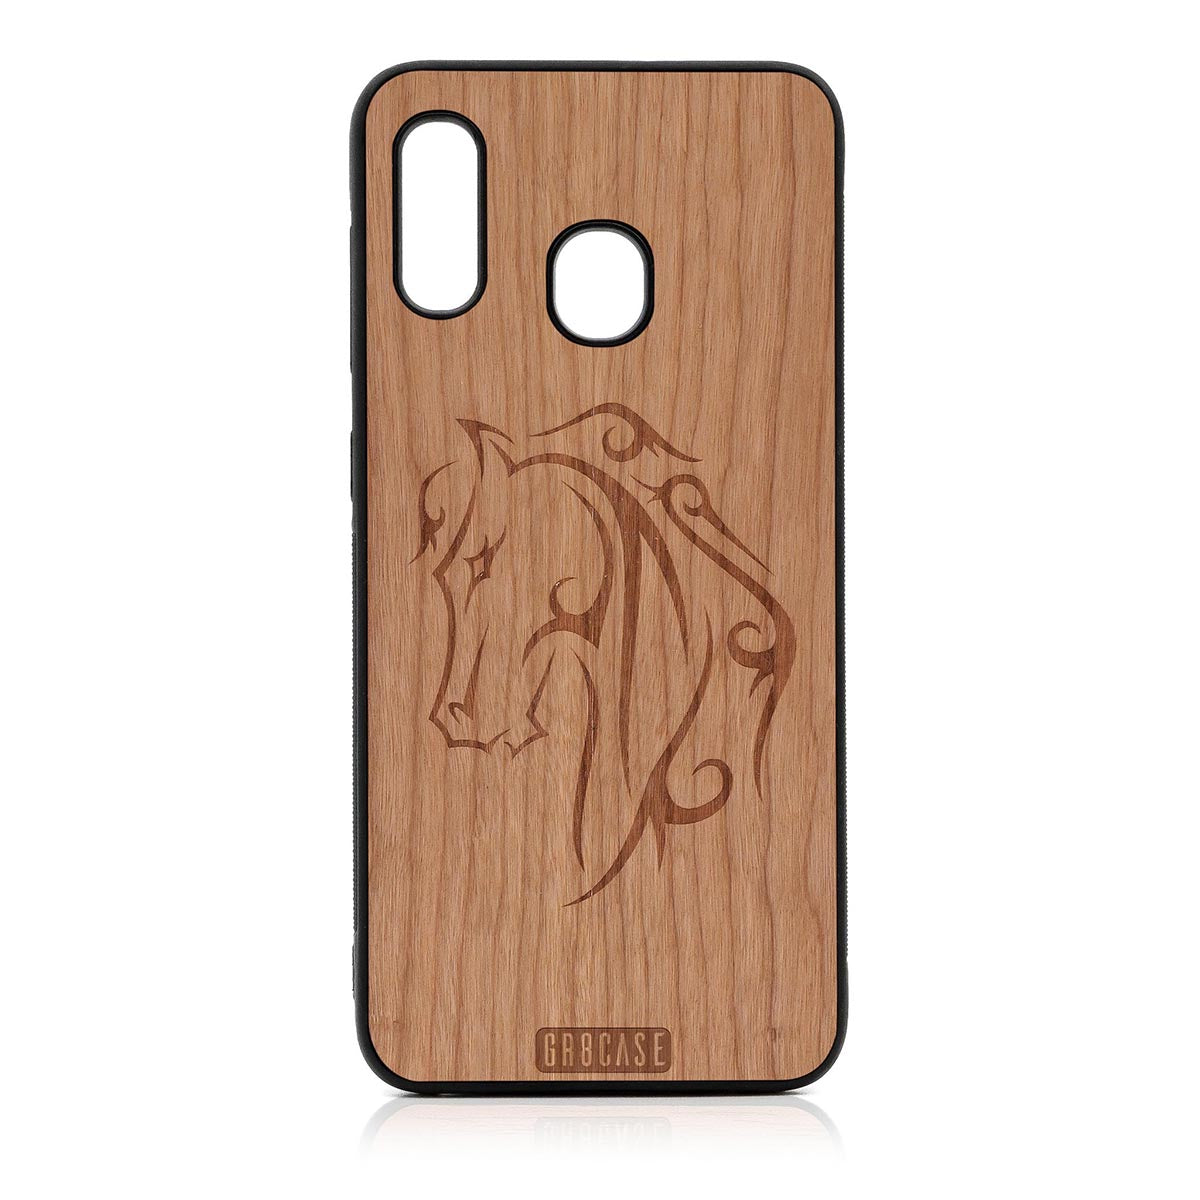 Horse Tattoo Design Wood Case For Samsung Galaxy A20 by GR8CASE